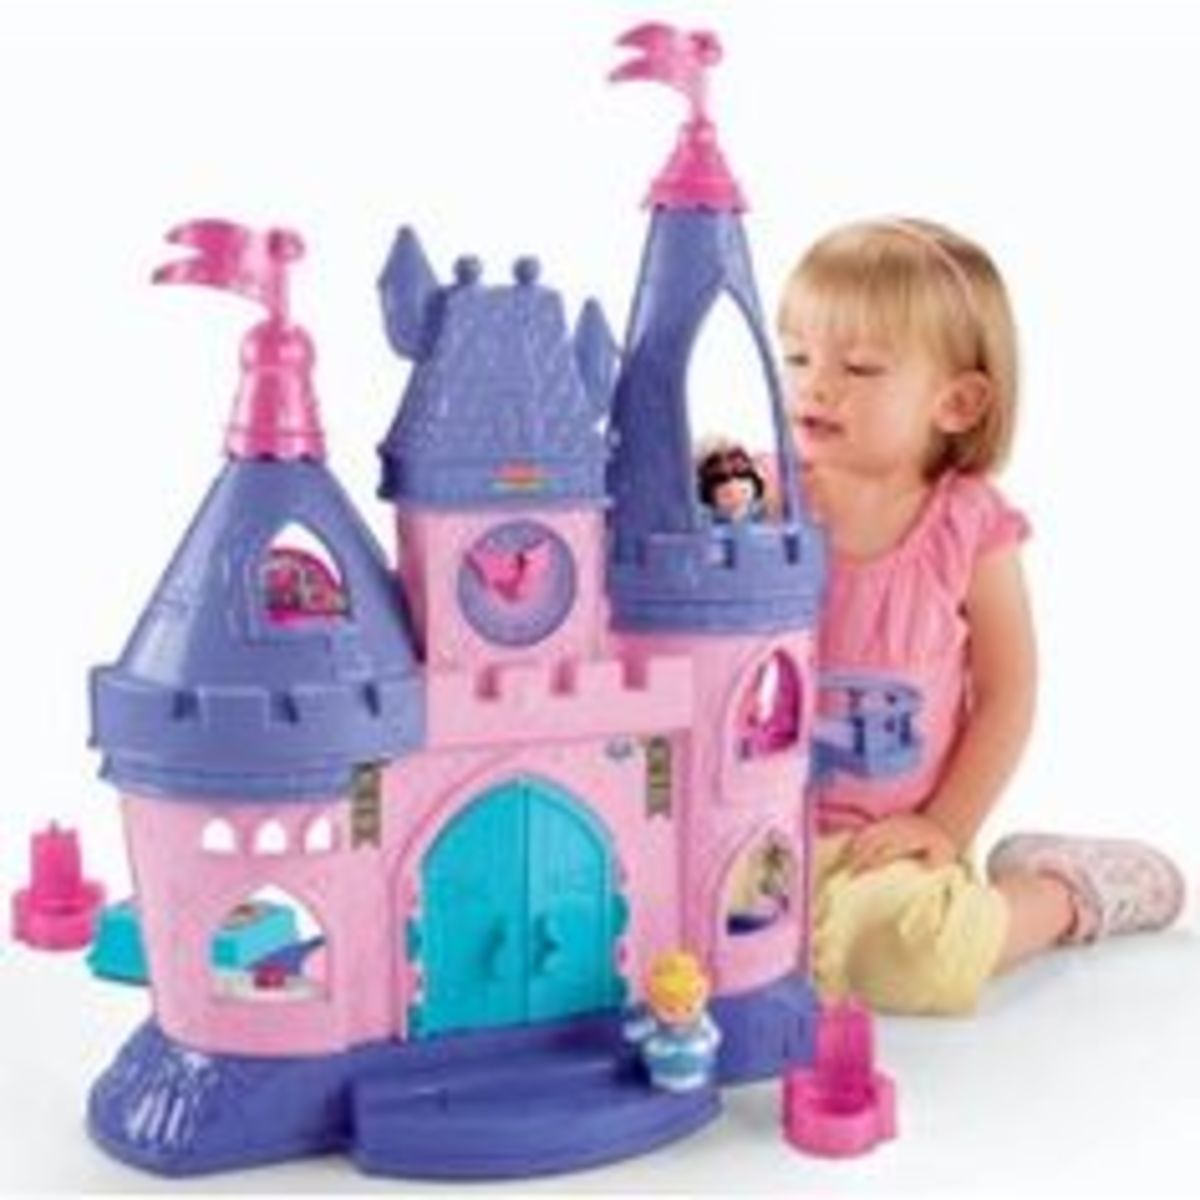 gift ideas for a 3 year old baby girl